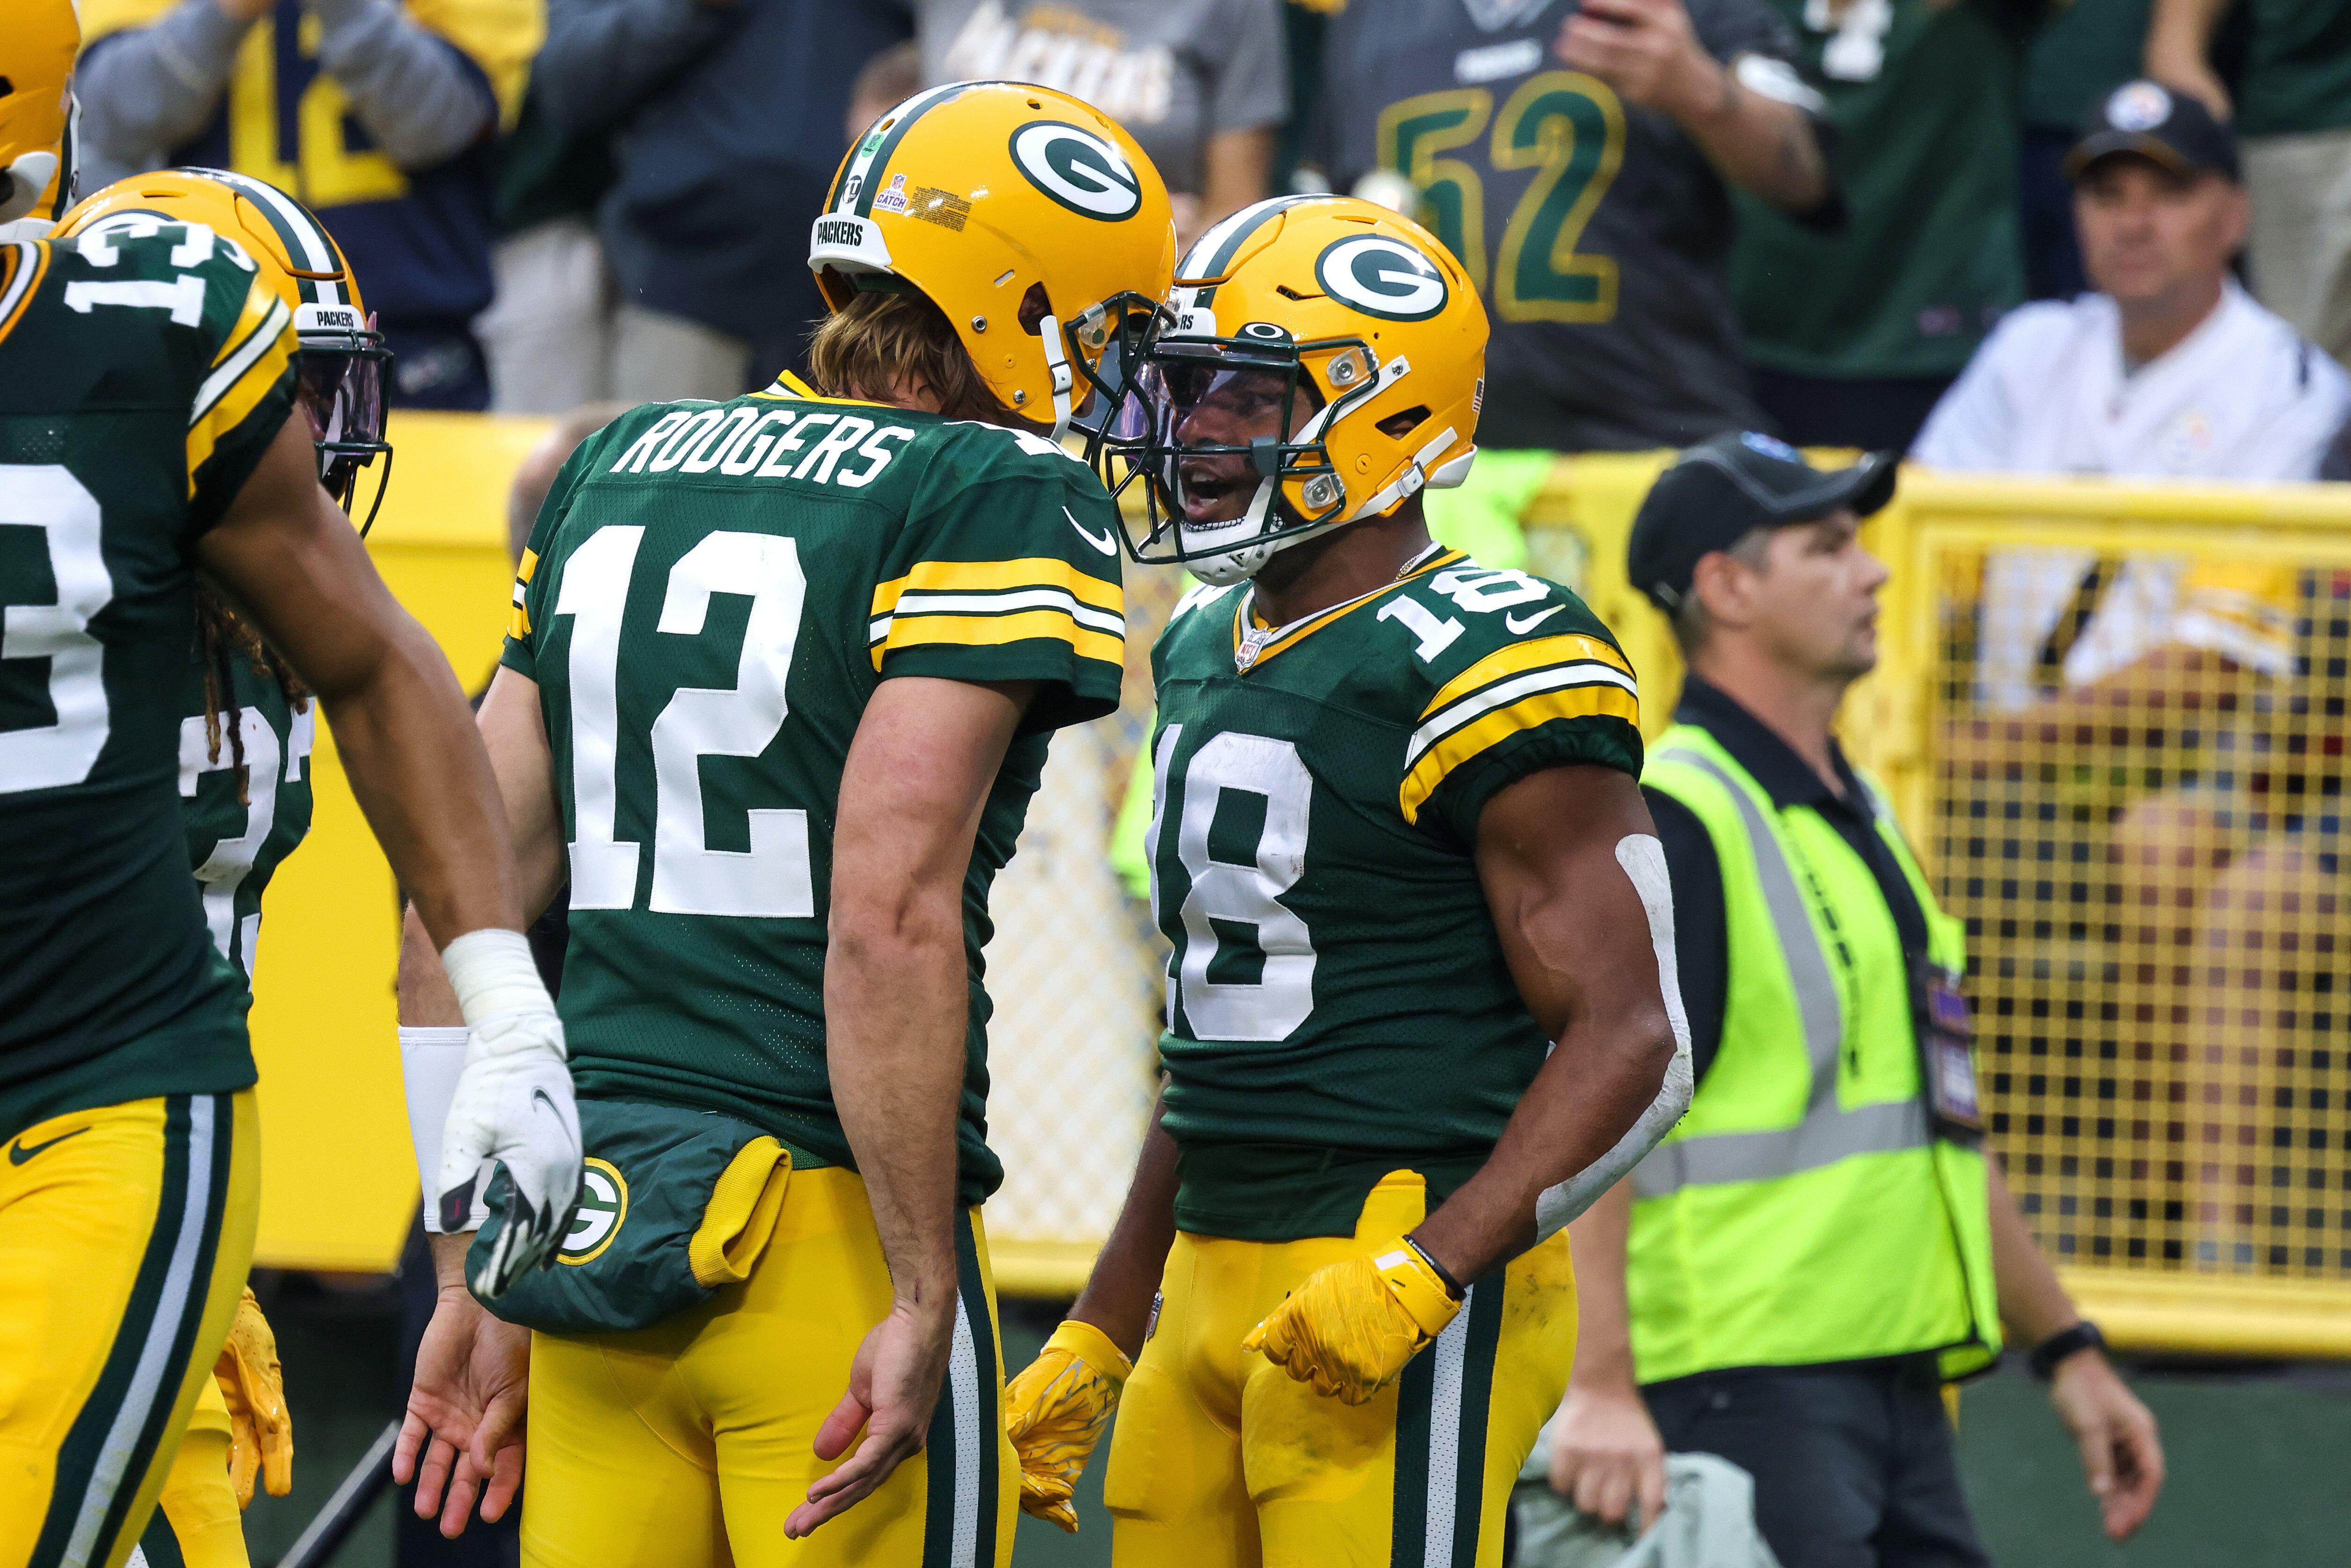 Aaron Rodgers and Randall Cobb celebrating during a game with the Green Bay Packers